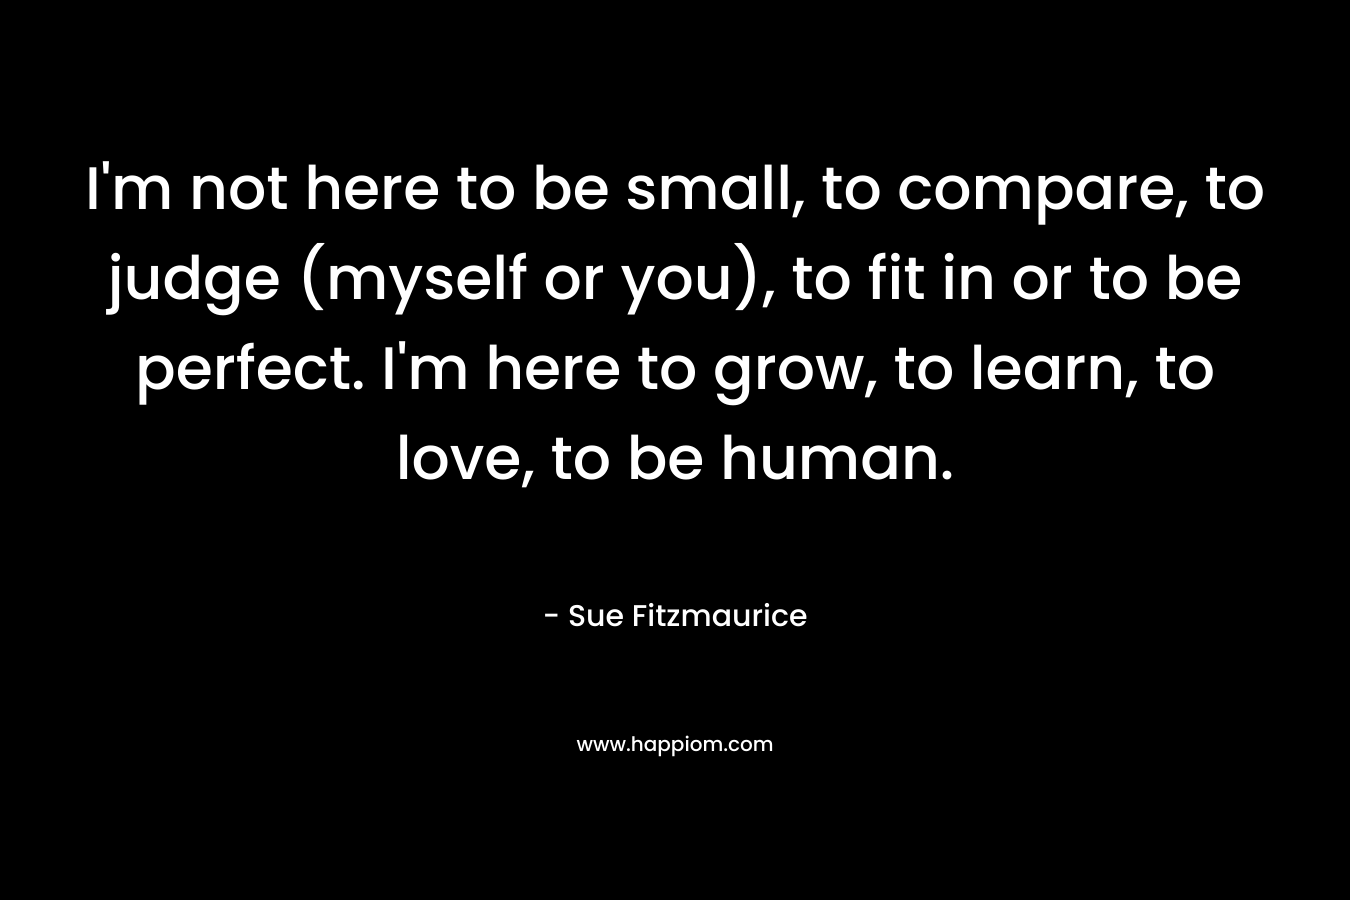 I'm not here to be small, to compare, to judge (myself or you), to fit in or to be perfect. I'm here to grow, to learn, to love, to be human.